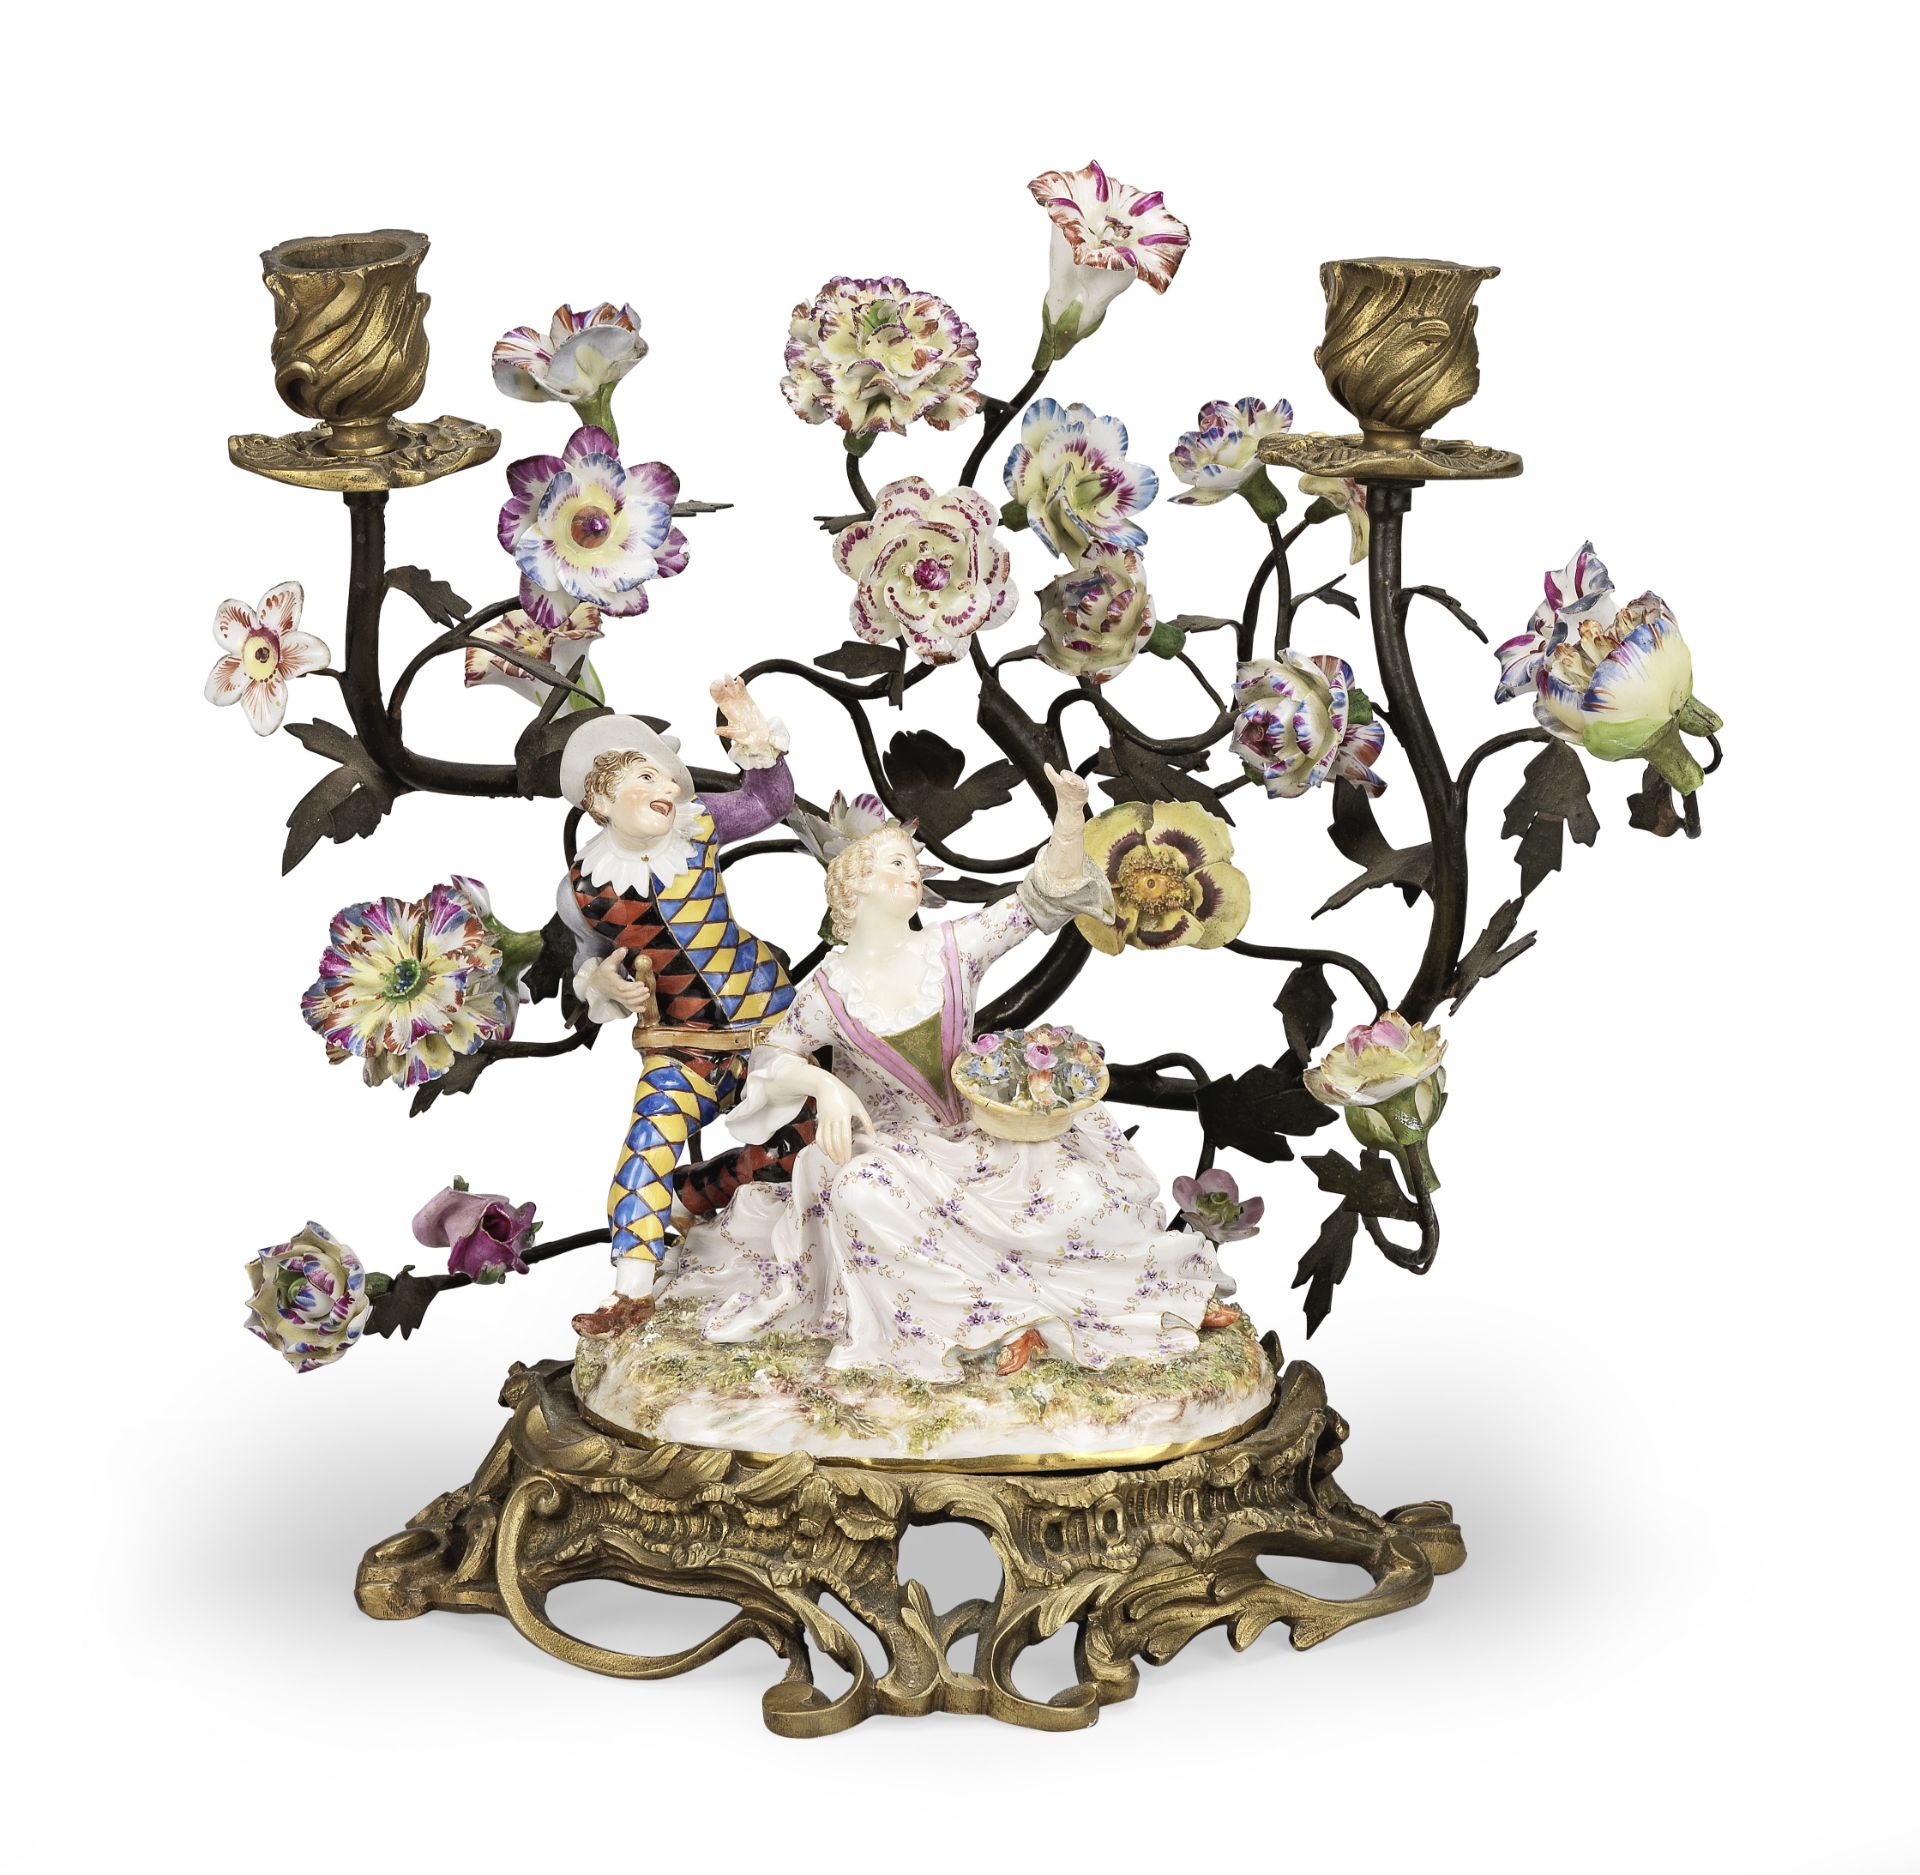 A Meissen group of Harlequin and Columbine, early 19th Century